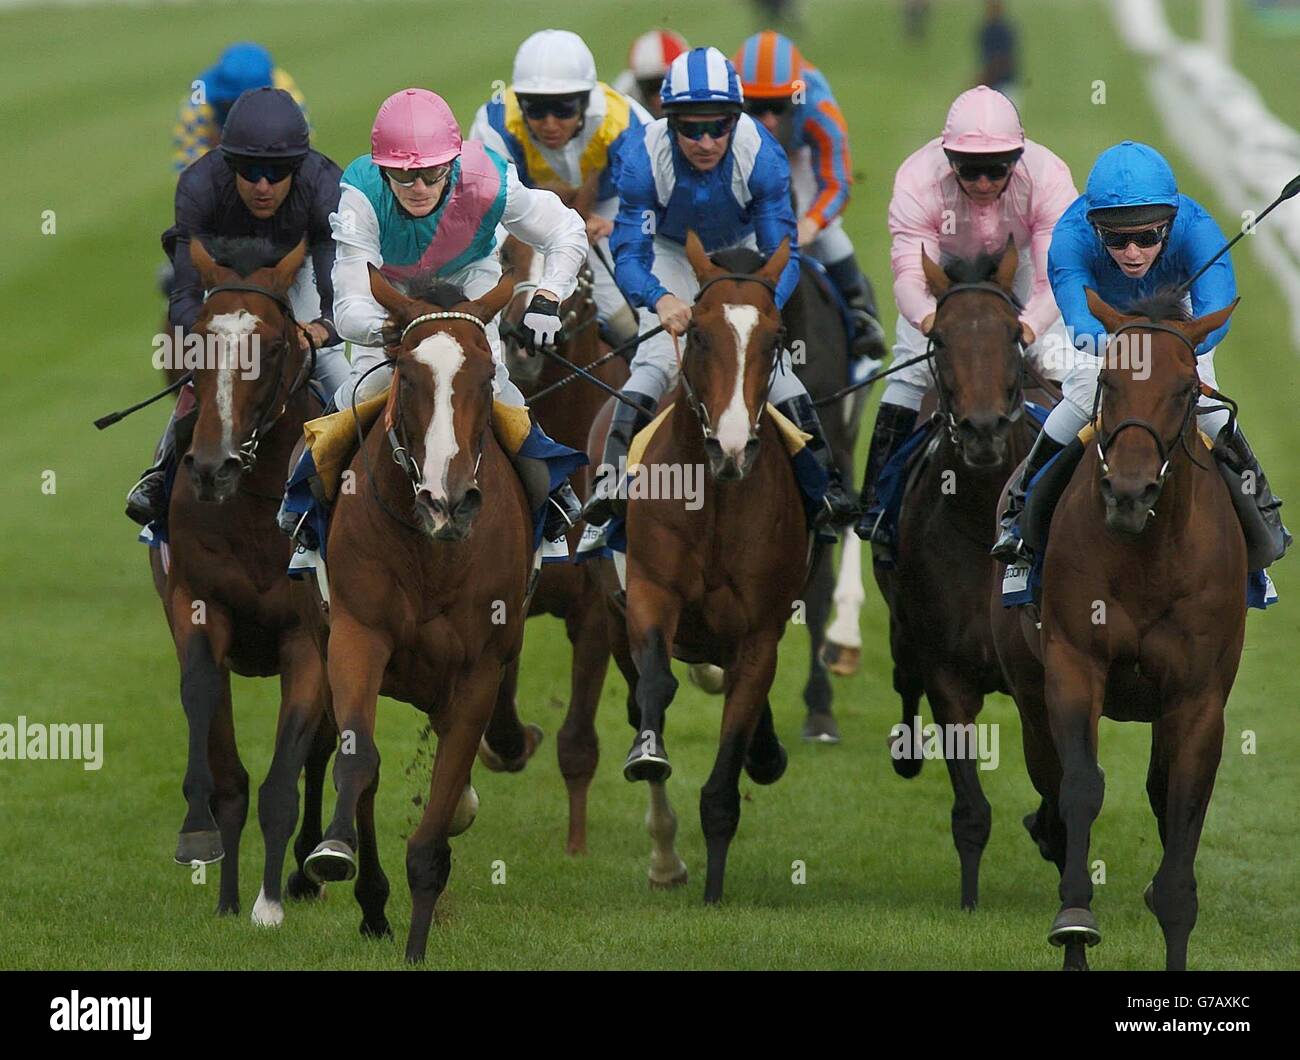 Kerrin McEvoy (right) wins the St Leger at Doncaster races, from Kieren Fallon and Quiff (Pink cap). Stock Photo